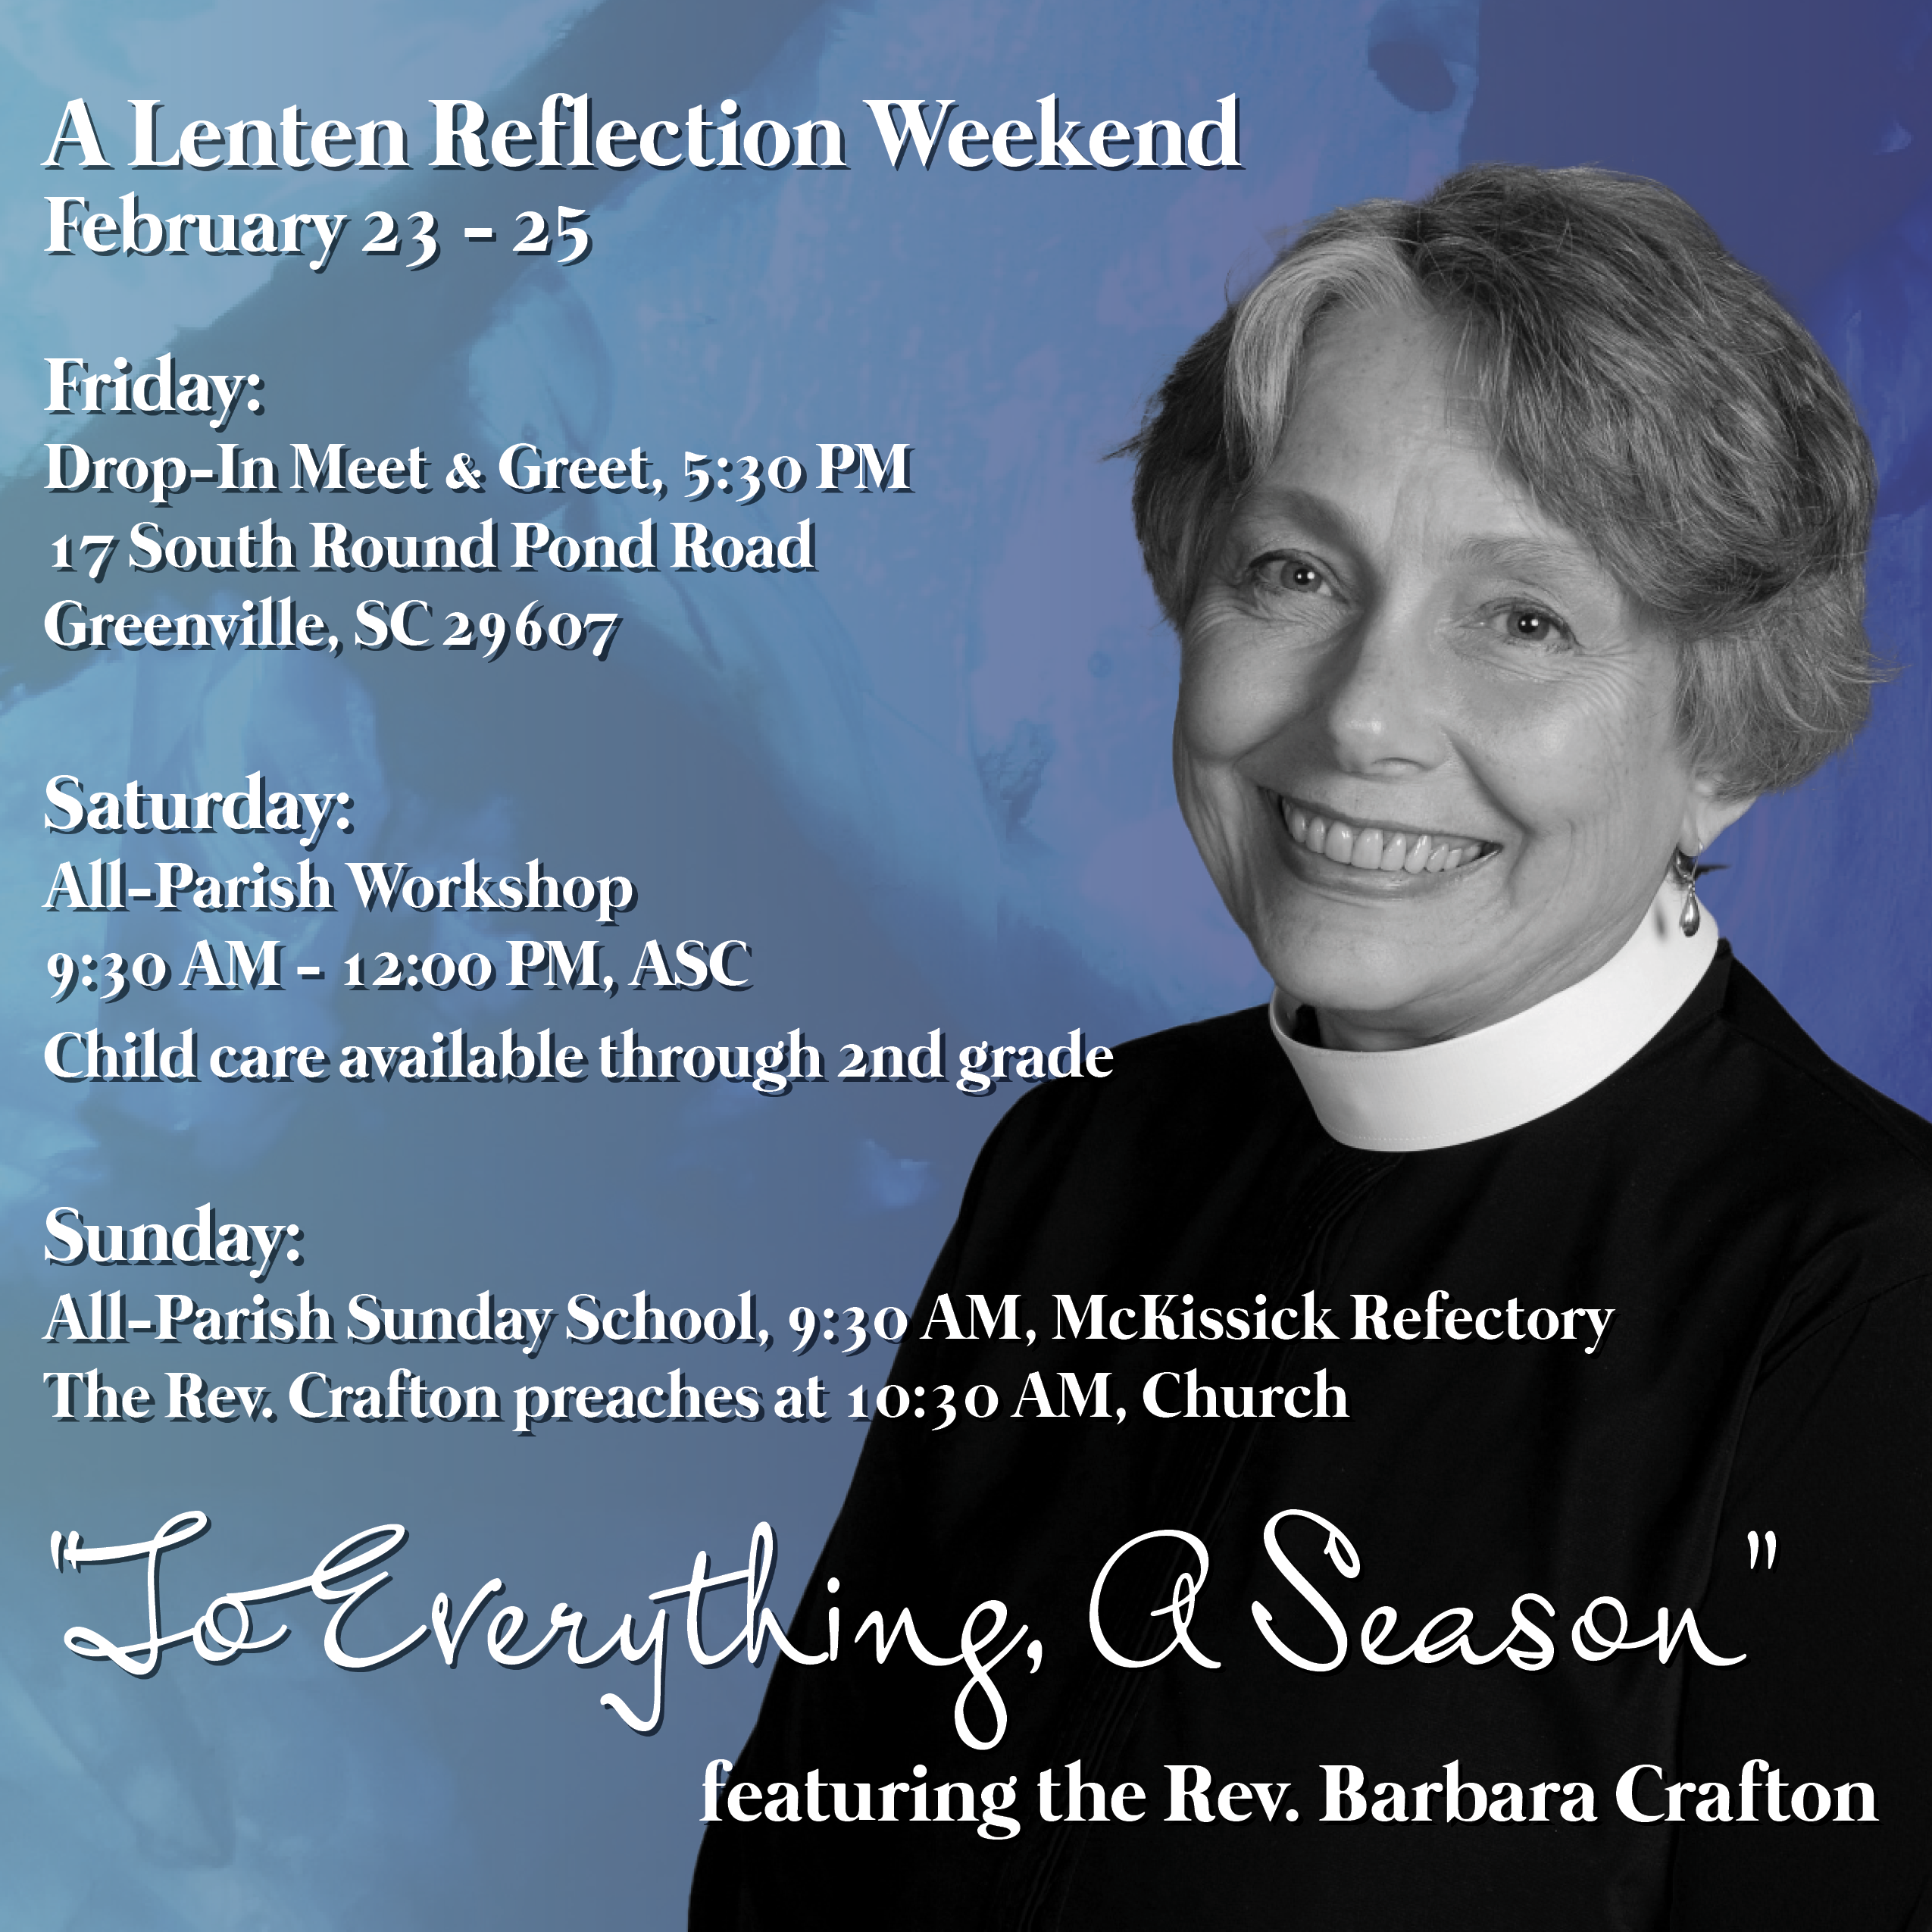 A Lenten Reflection Weekend - “To Everything, A Season”, featuring the Rev. Barbara Crafton, February 23 - 25, Christ Church, Greenville SC